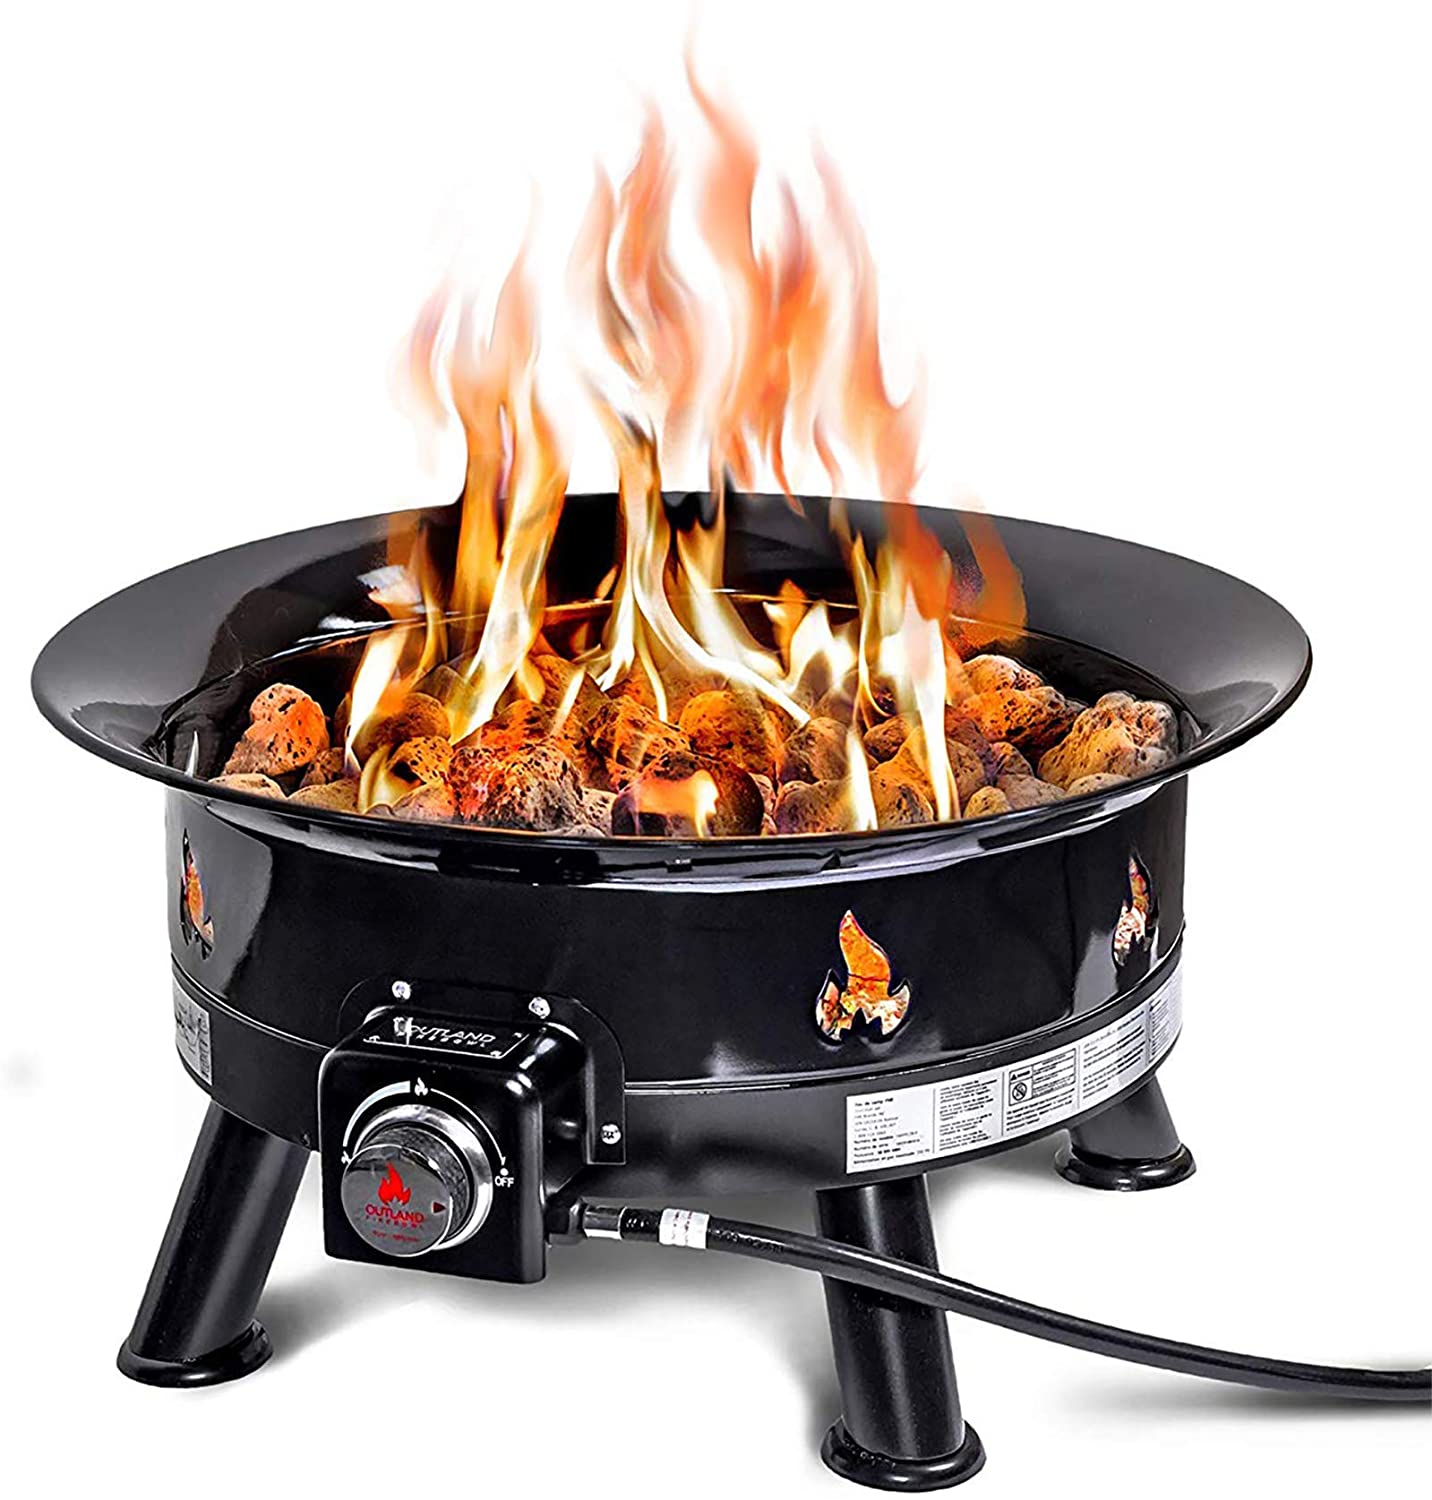 The Best Fire Pit December 2021, Best Small Outdoor Propane Fire Pit